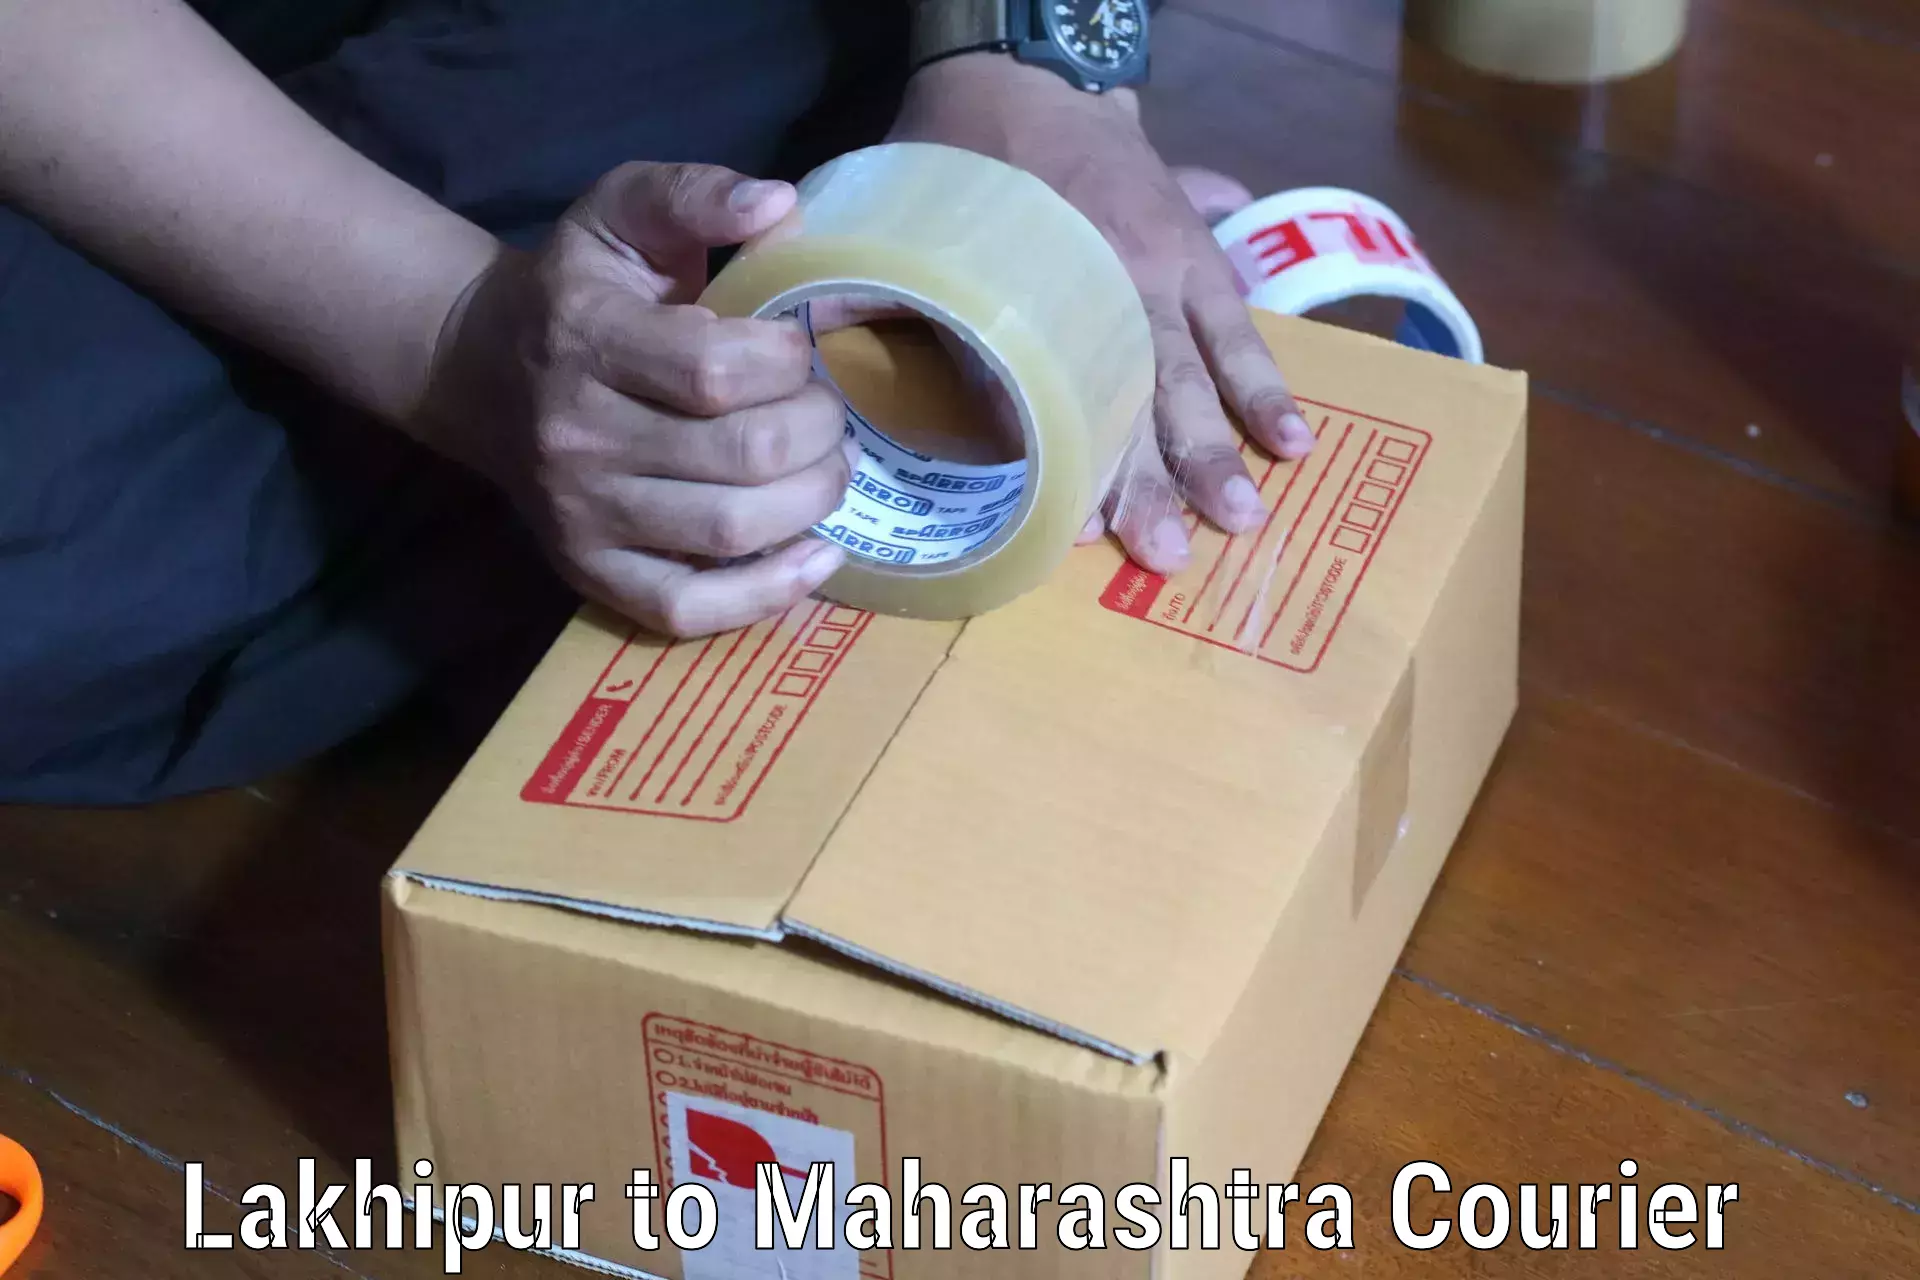 Small parcel delivery in Lakhipur to Raigarh Maharashtra